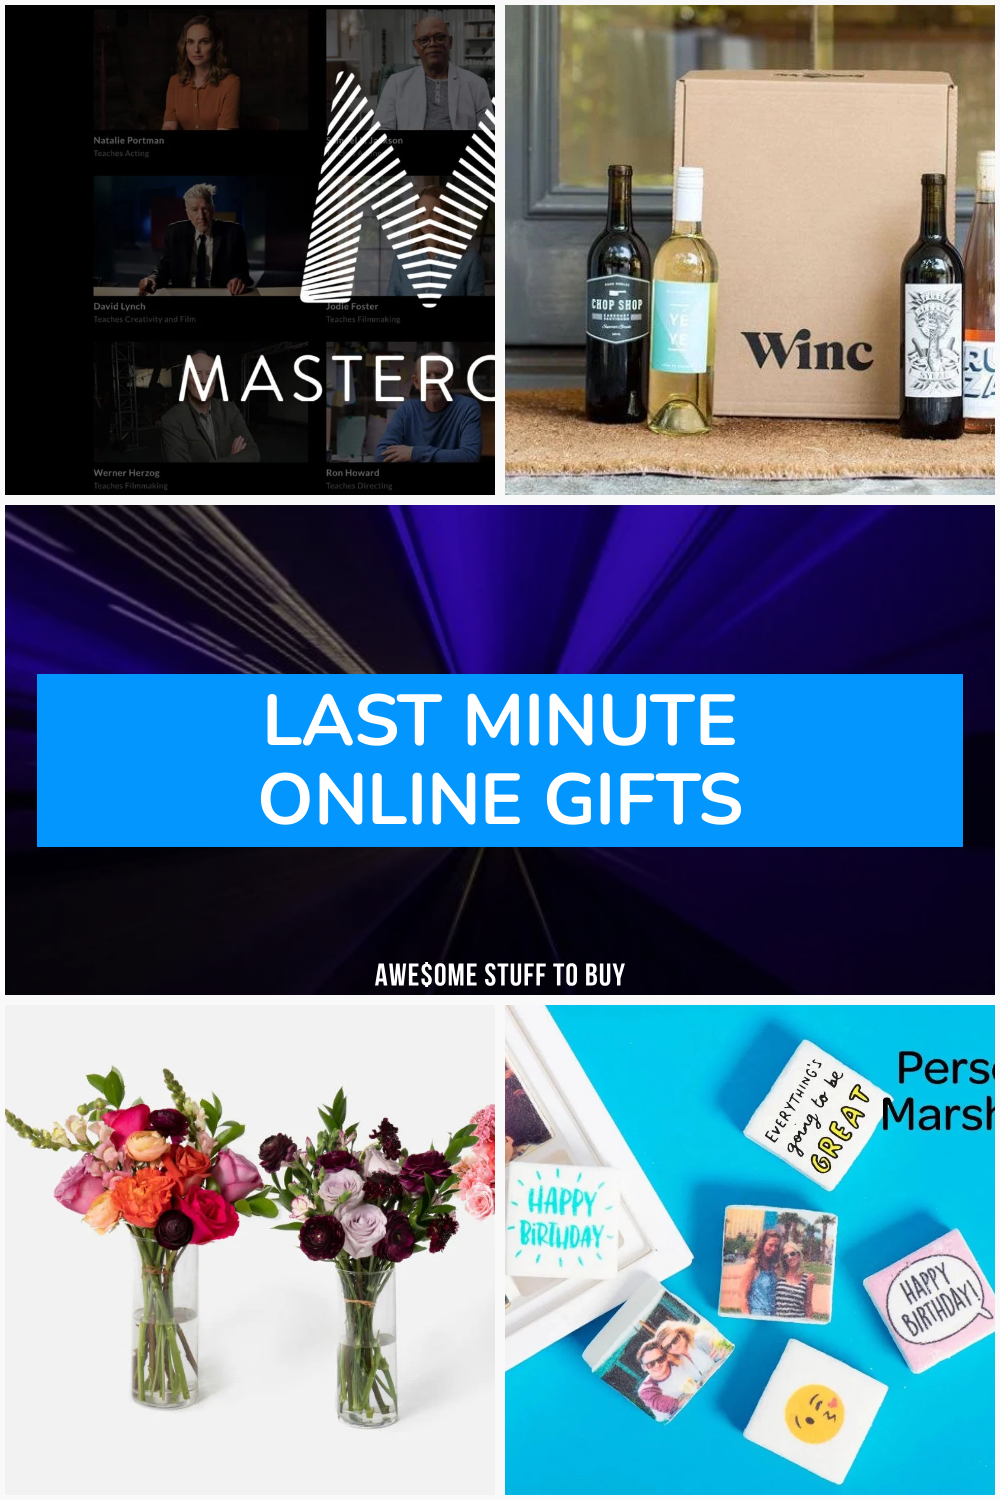 Last Minute Online Gifts // Awesome Stuff to Buy